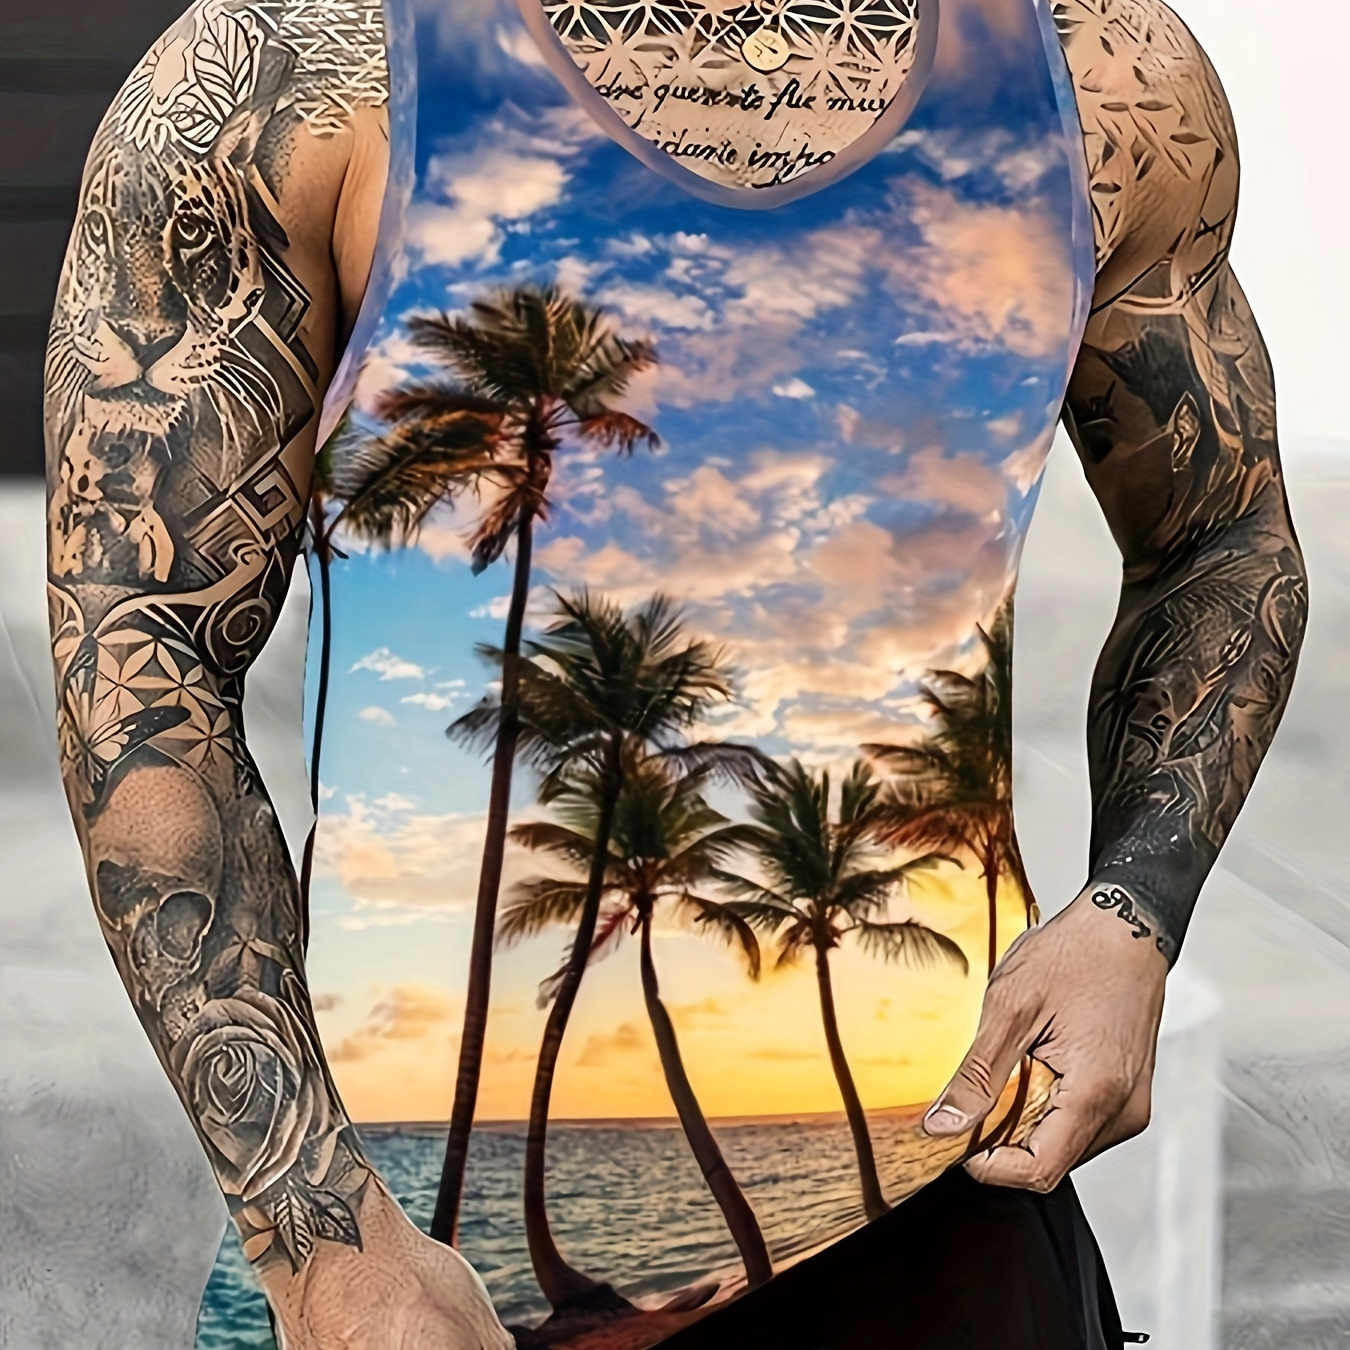 

Men's Trendy Crew Neck Graphic Tank Top With Fancy Palm Tree Prints, Street Style For Summer Wear